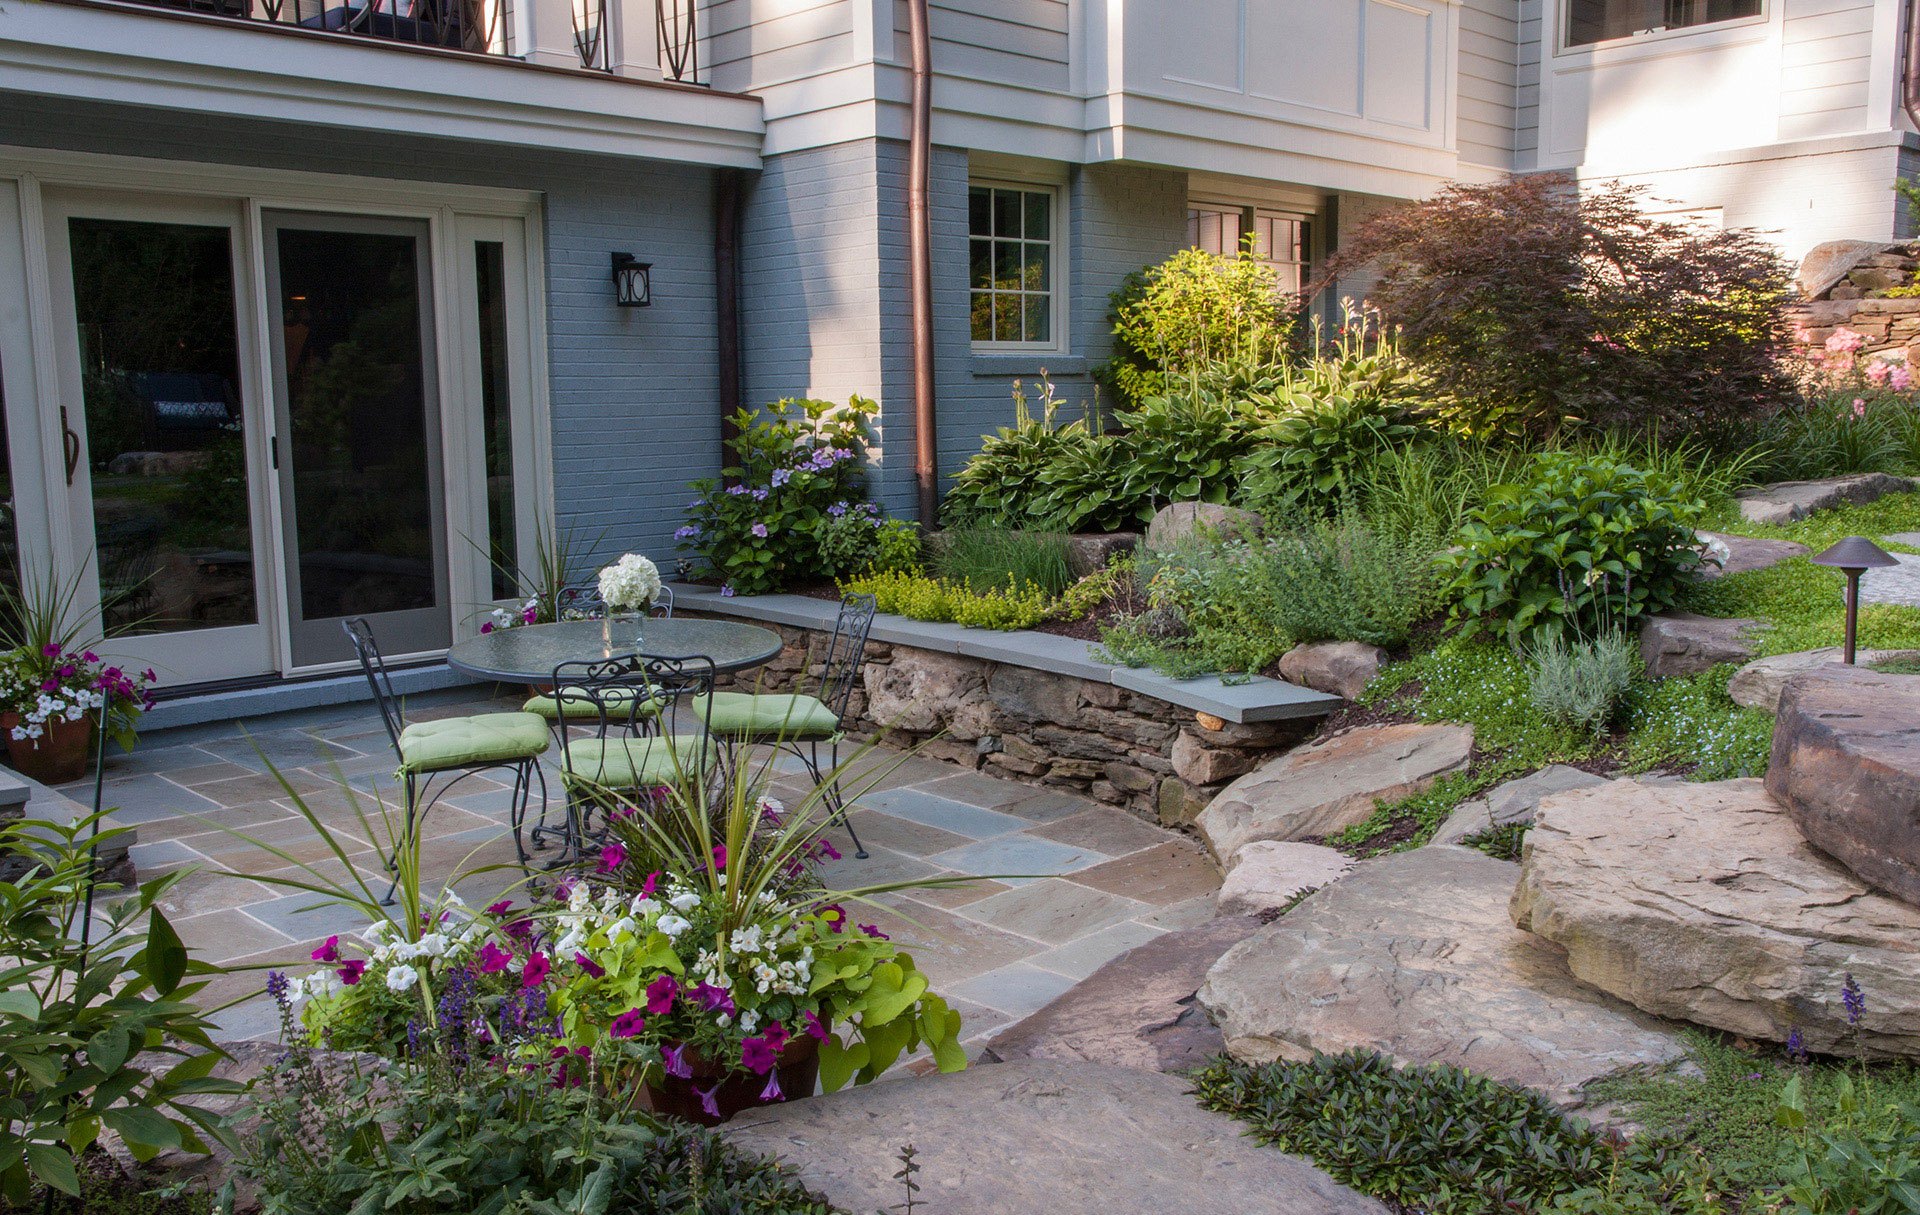 A picturesque outdoor space with a hot tub and patio furniture, bordered by a beautiful stone wall.